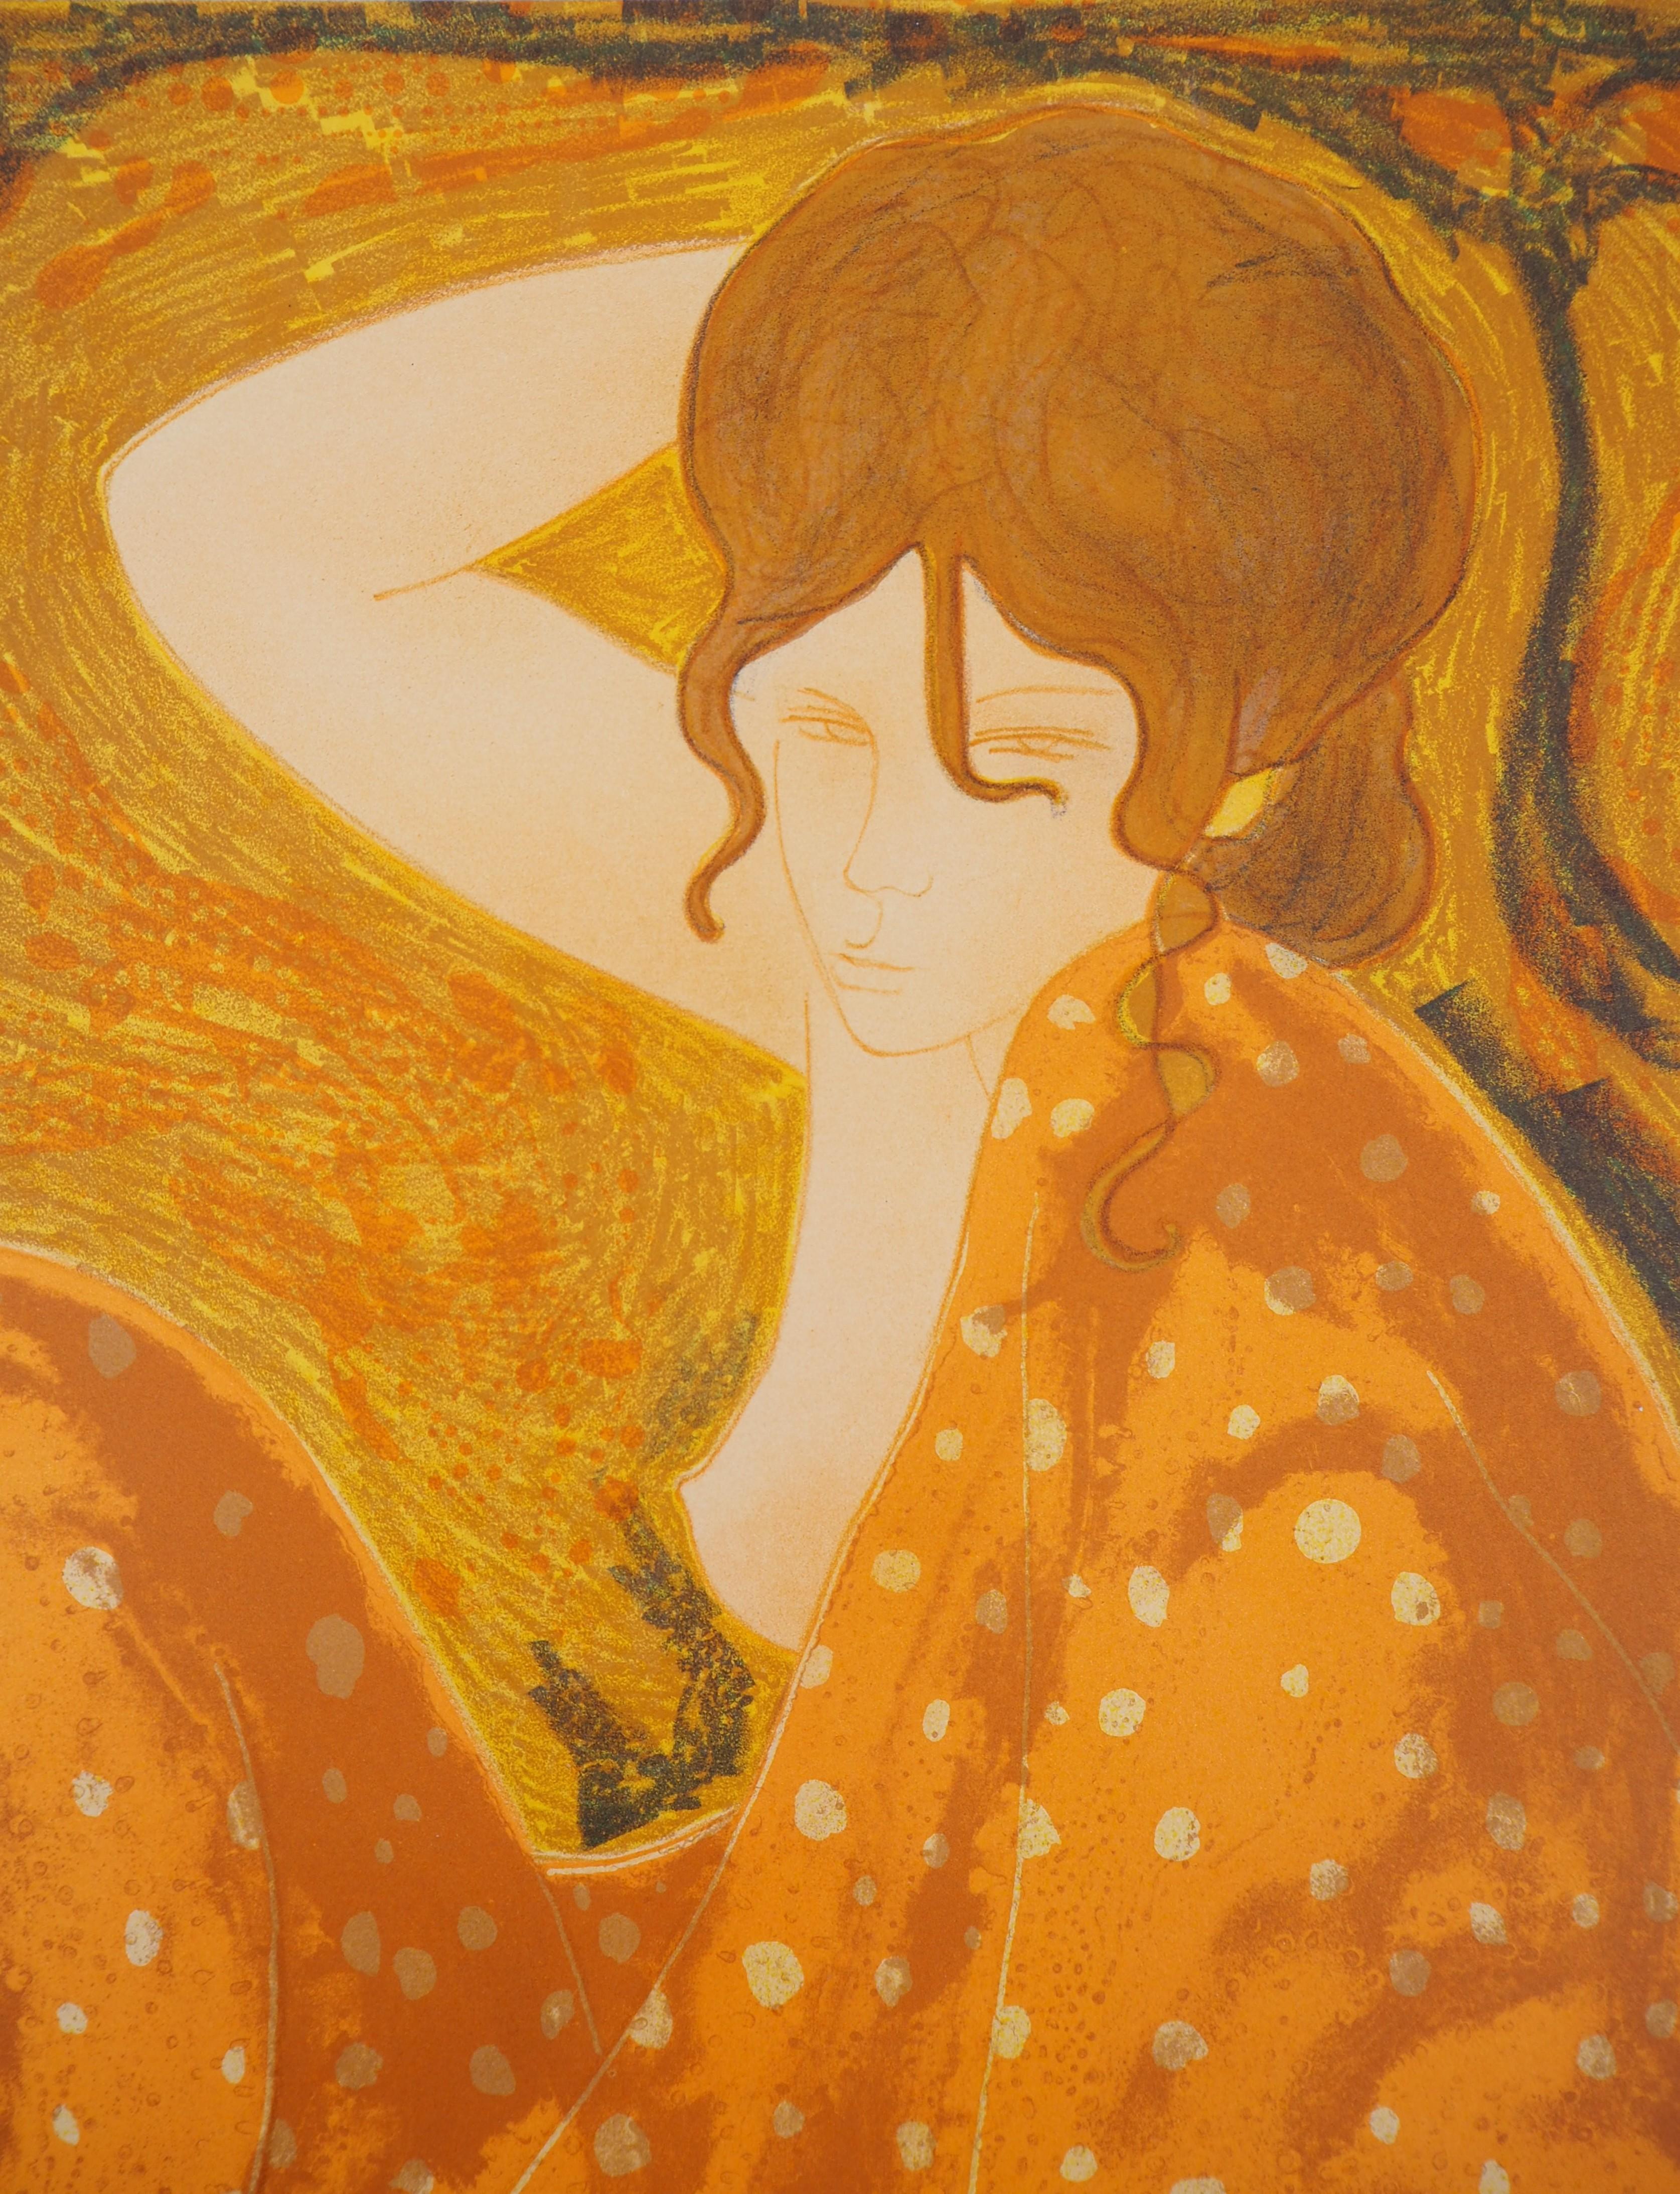 Relaxing Nudes - Original lithograph, Handsigned and Numbered /100 - Orange Nude Print by Alain Bonnefoit